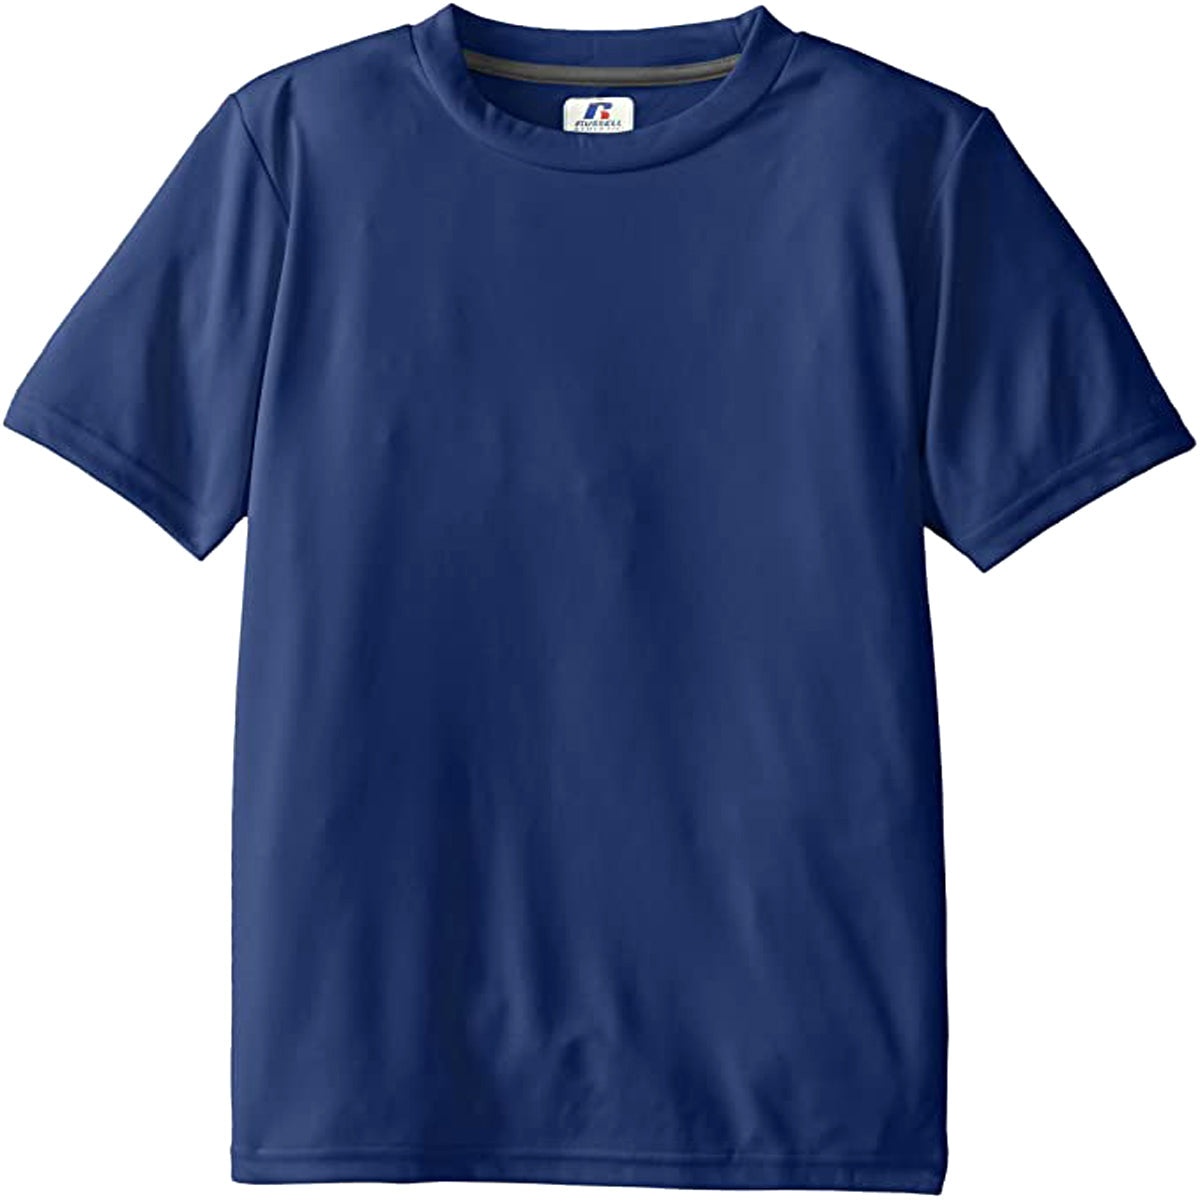 Russell Athletic Youth Short-Sleeve Cotton T-Shirt | 94030BK Apparel Russell Athletic Youth Small Navy 